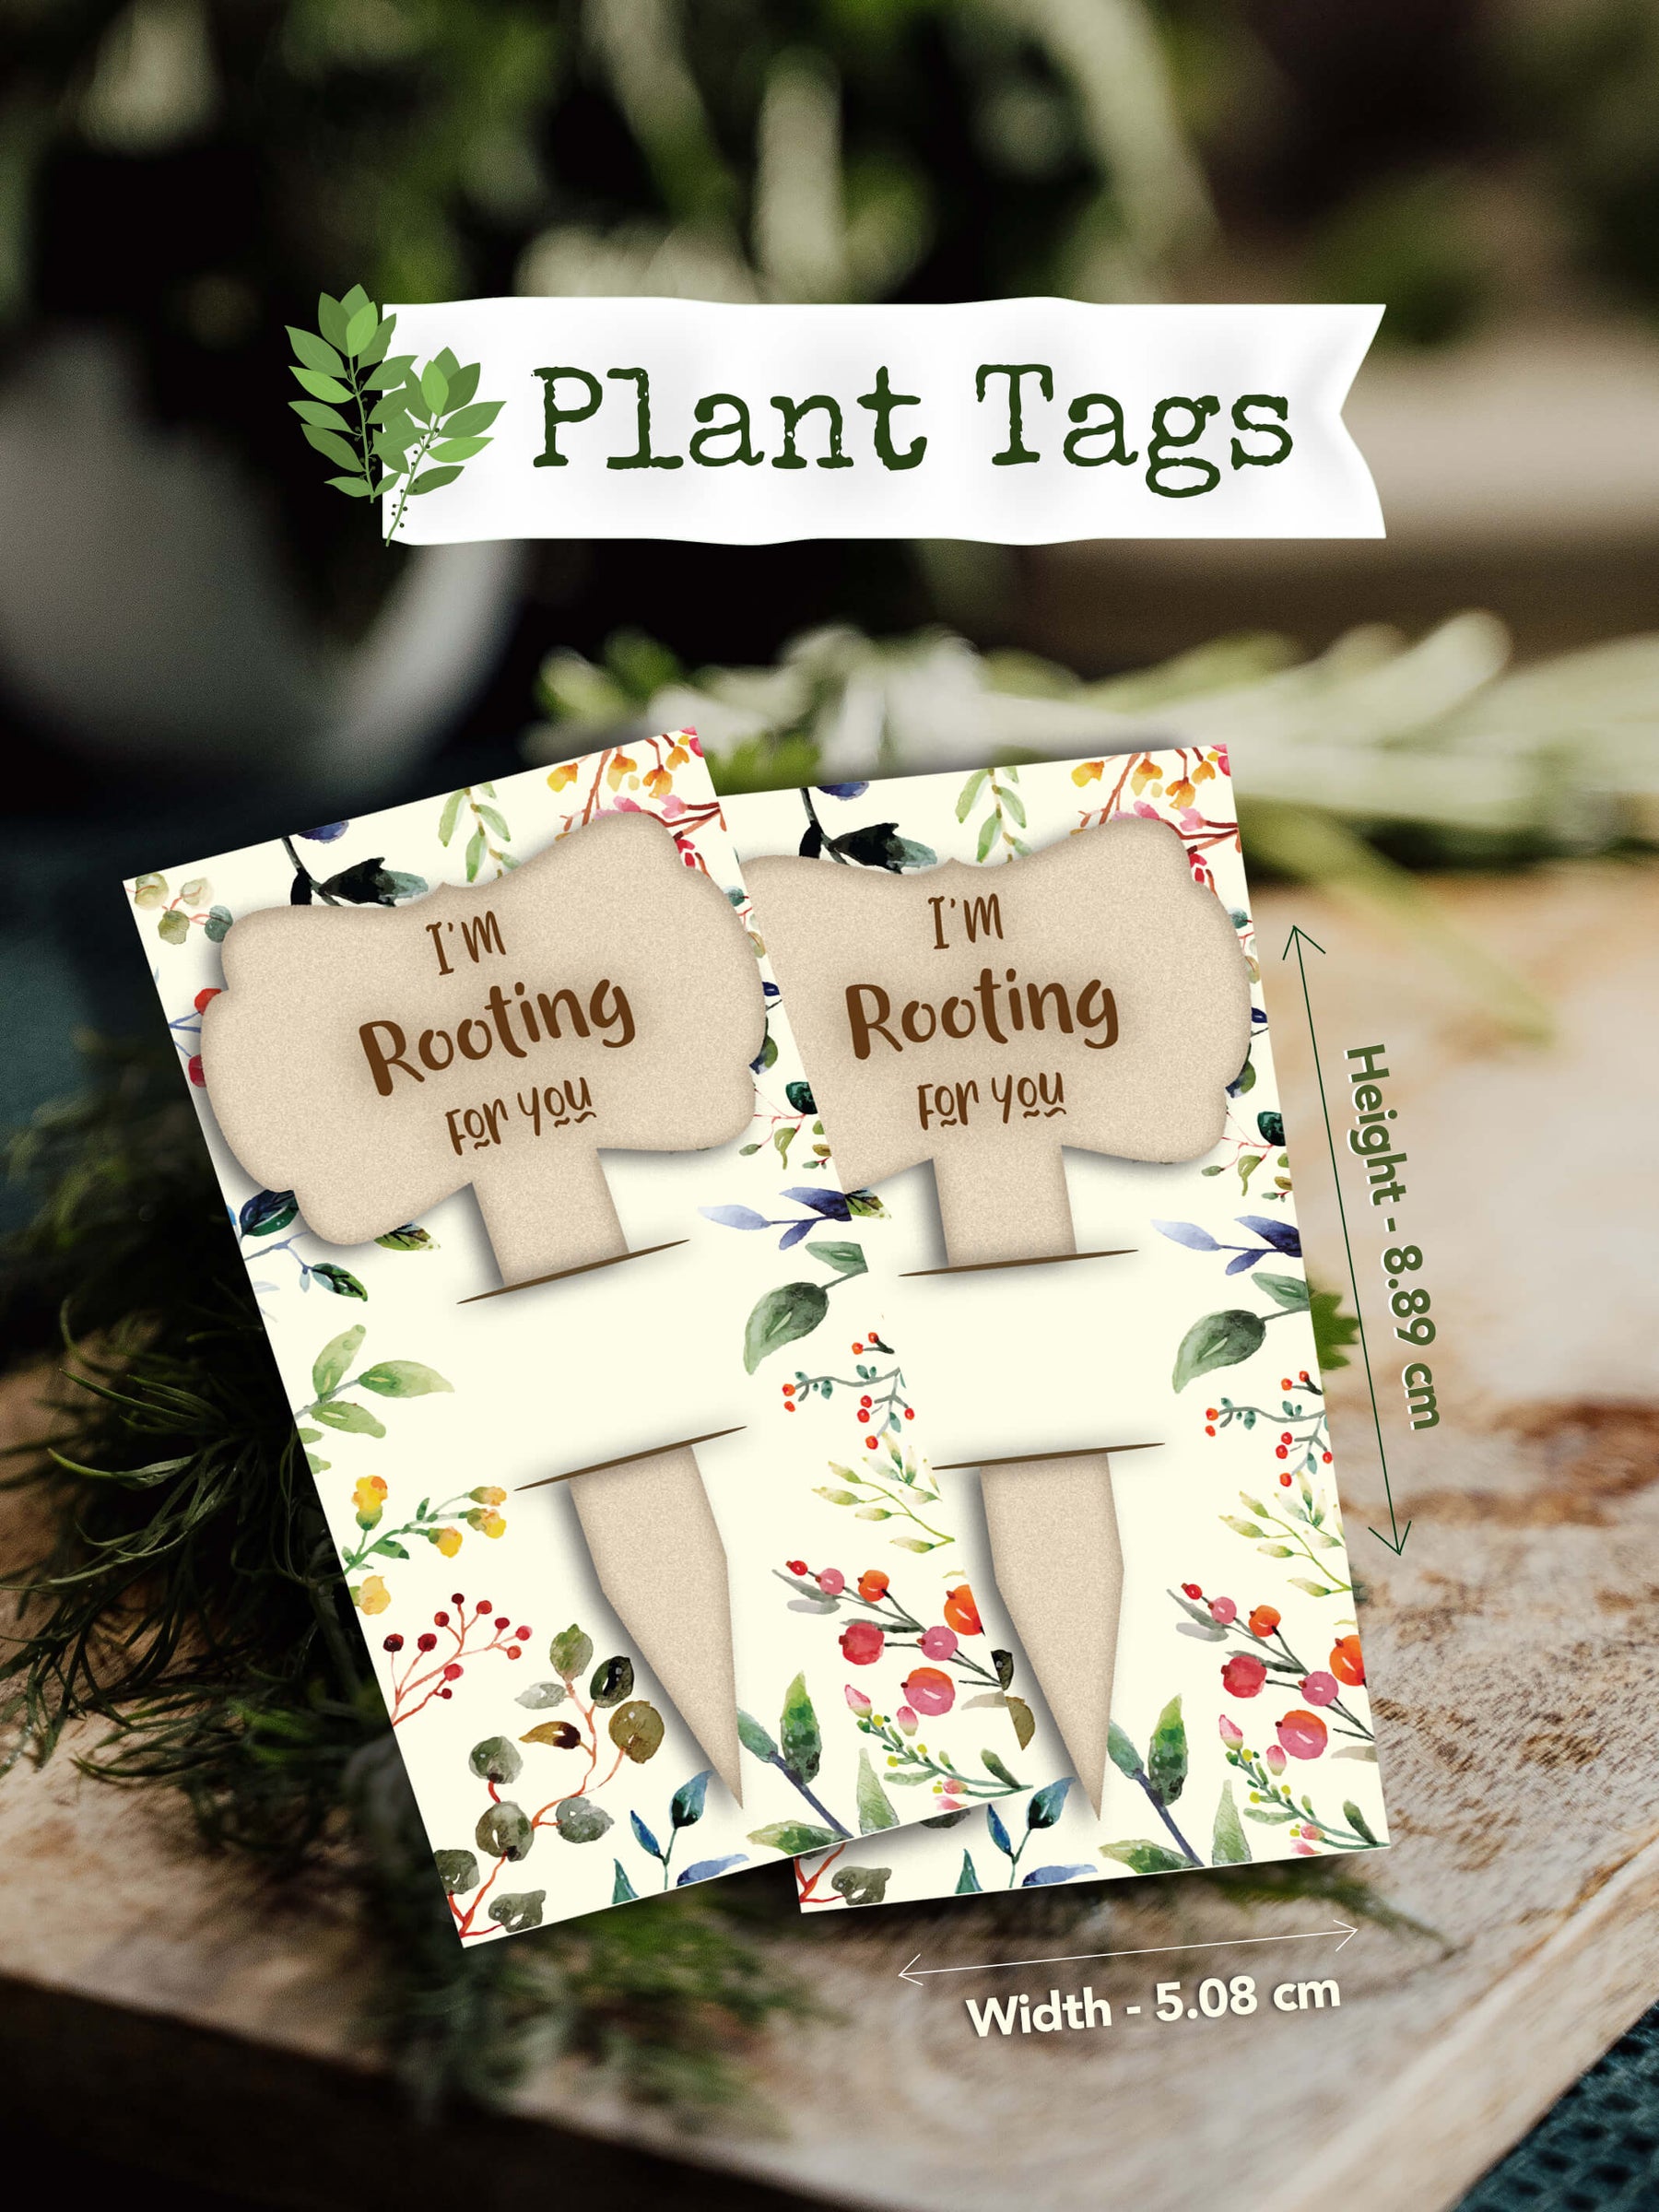 Gardening Gifts for Plant Parents - Seeds & Plant Tags